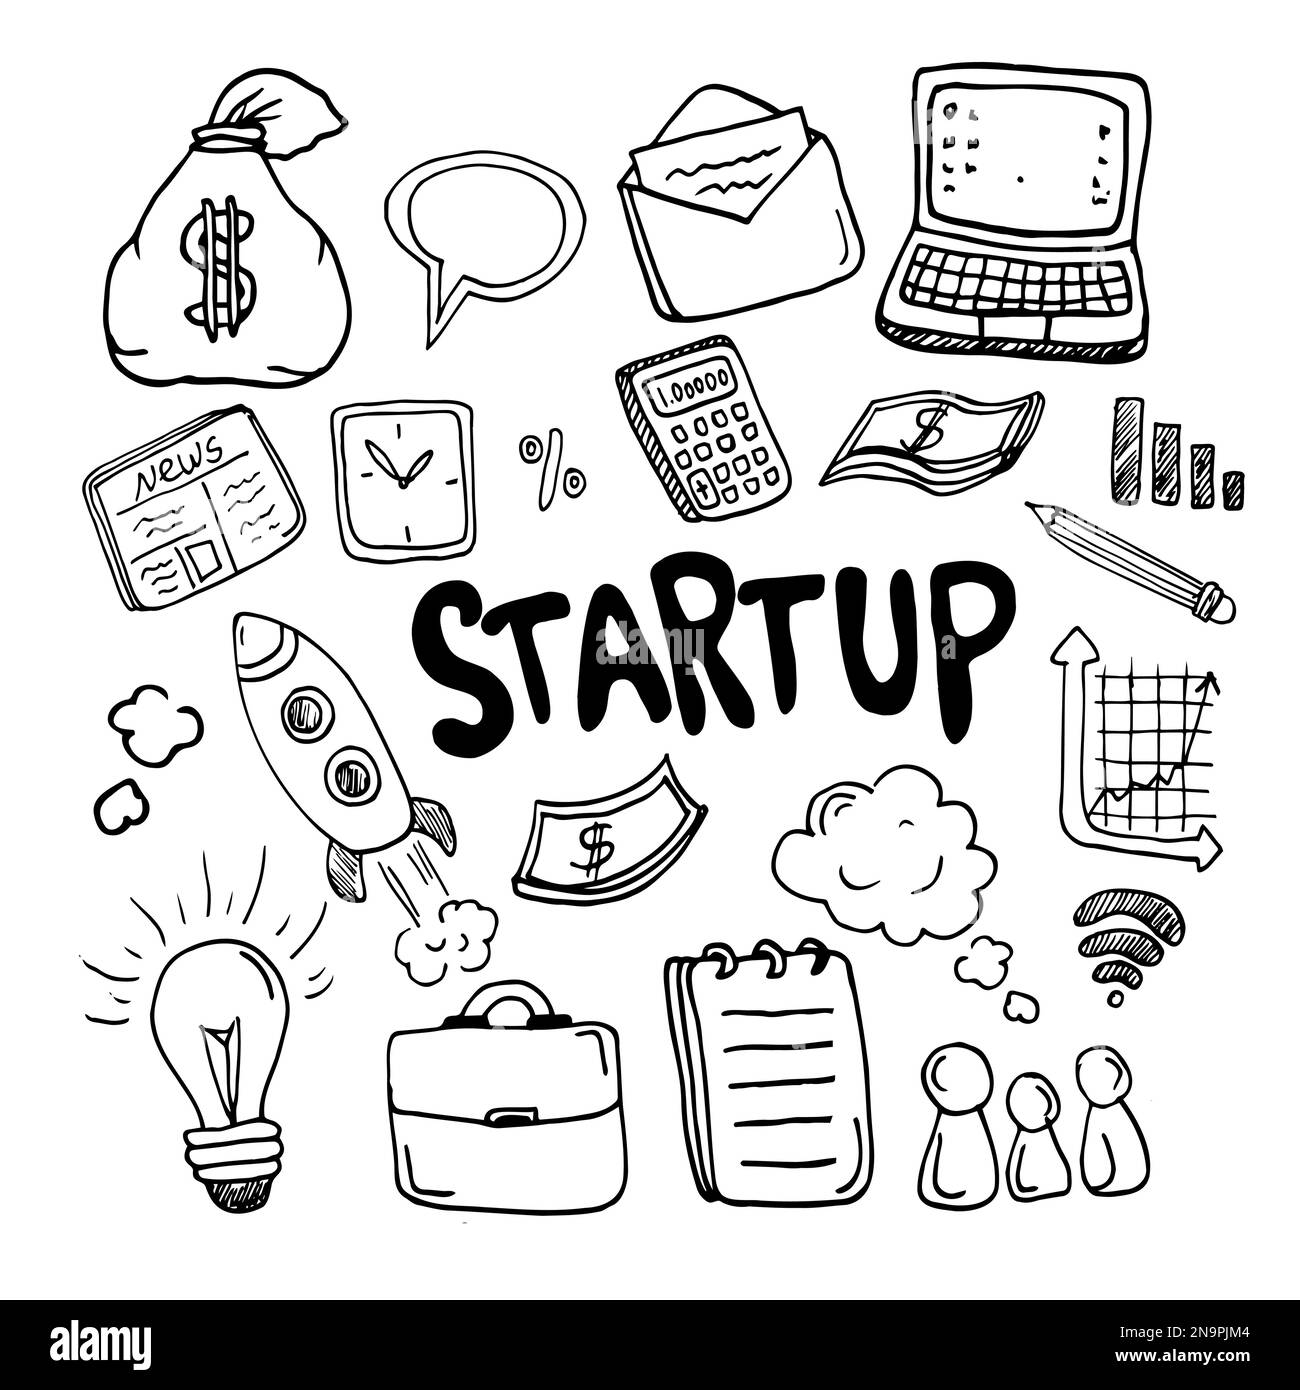 Set of vector doodle element related to startup. Set of hand drawn fresh tech company symbols and icons. Stock Vector